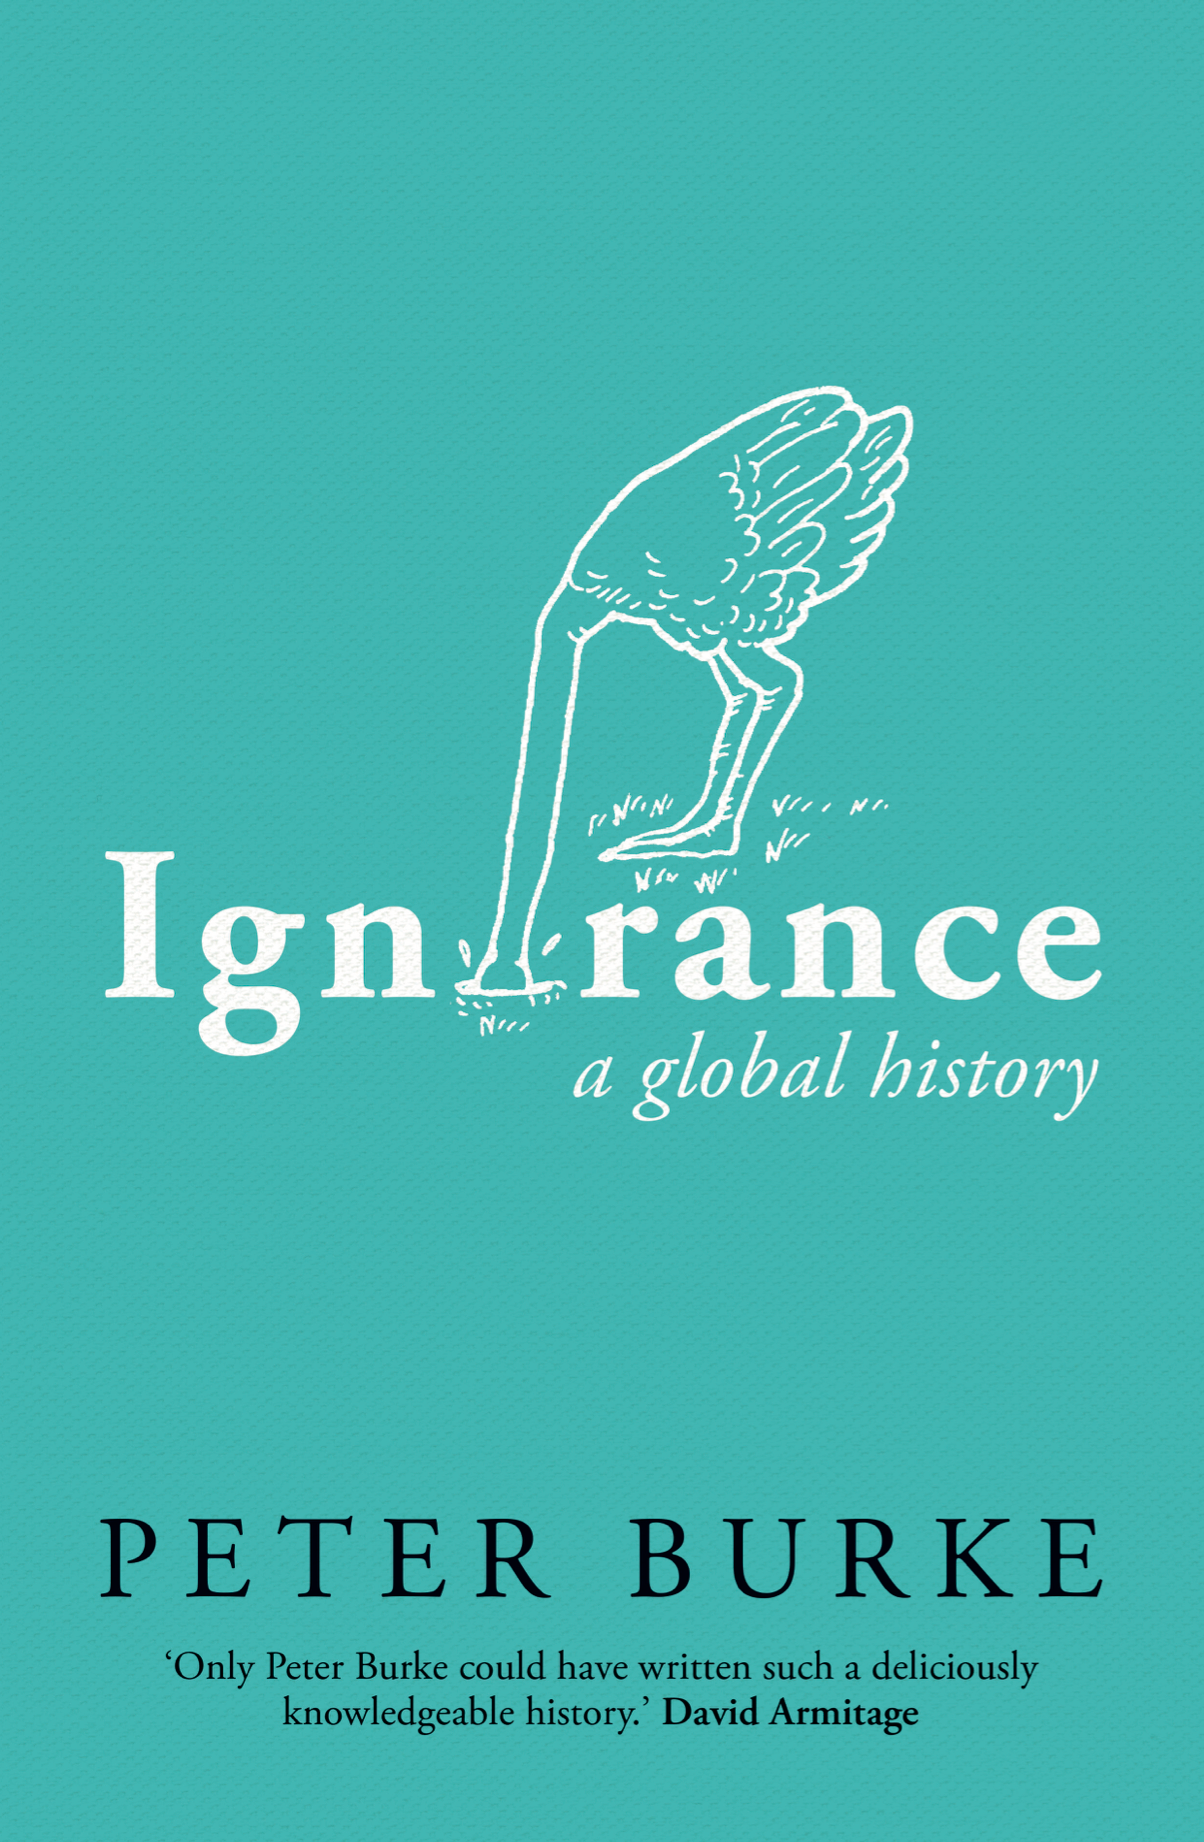 A Crowd of Incompetents: On Peter Burke’s “Ignorance”